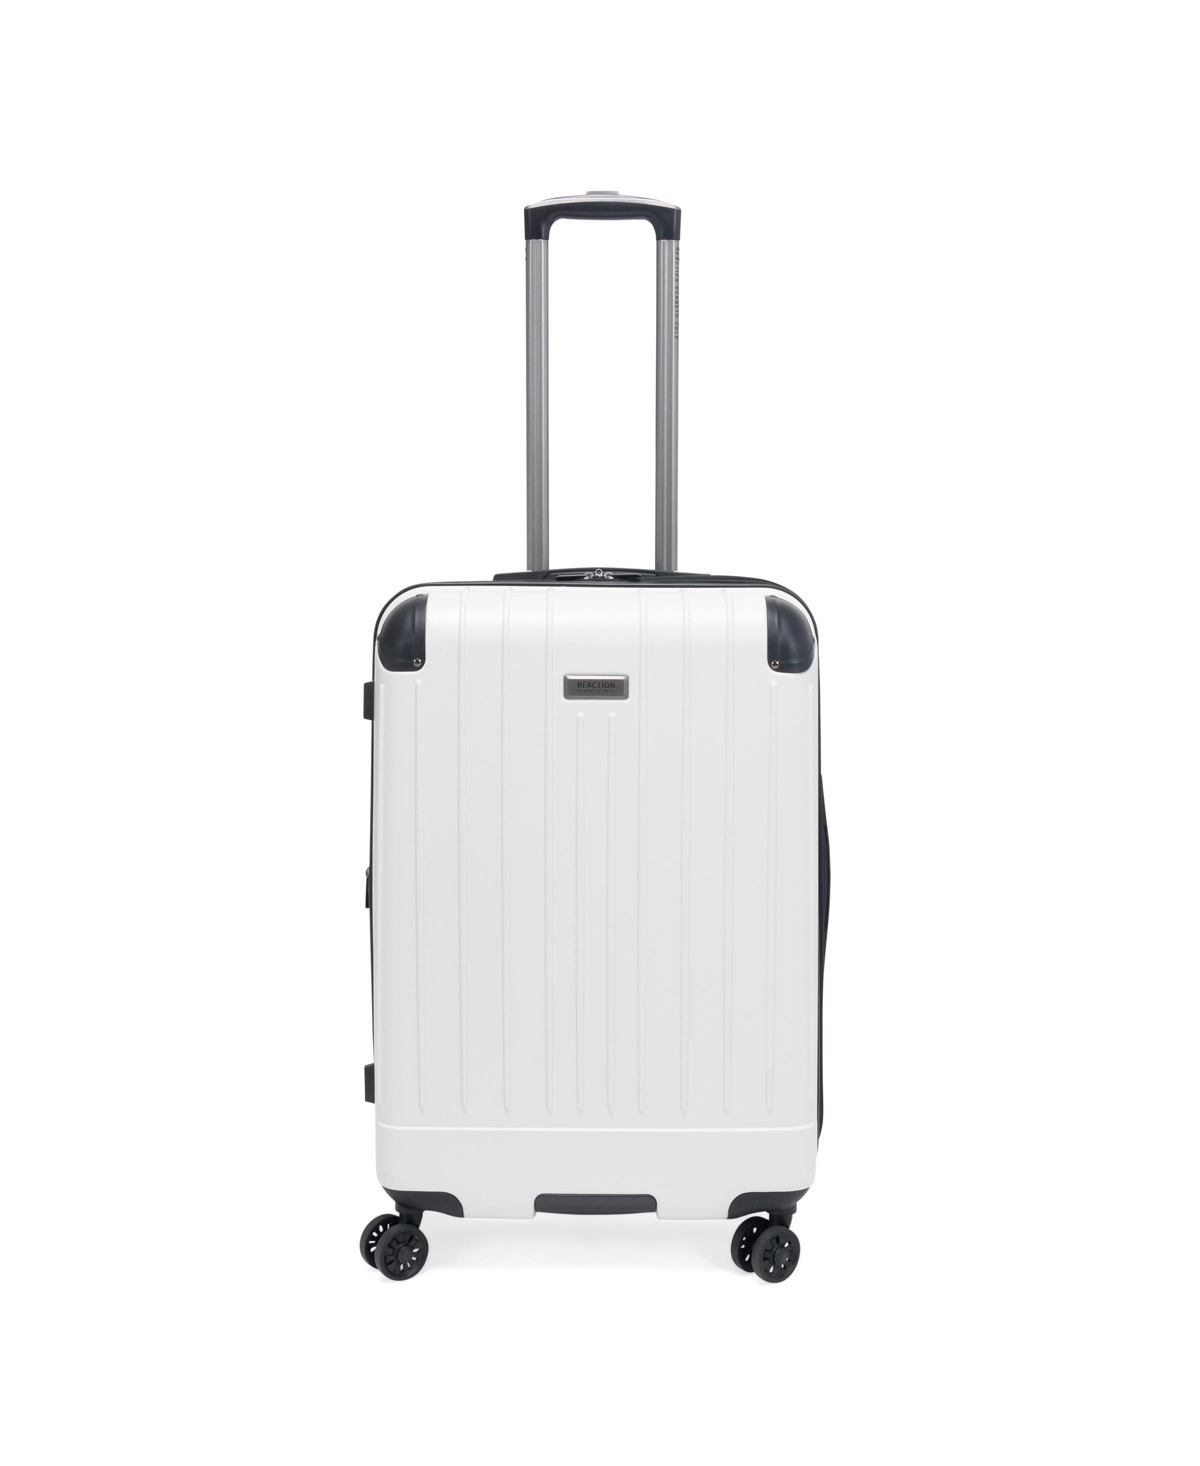 Kenneth Cole Reaction Flying Axis 28" Hardside Expandable Checked Luggage In Coconut White